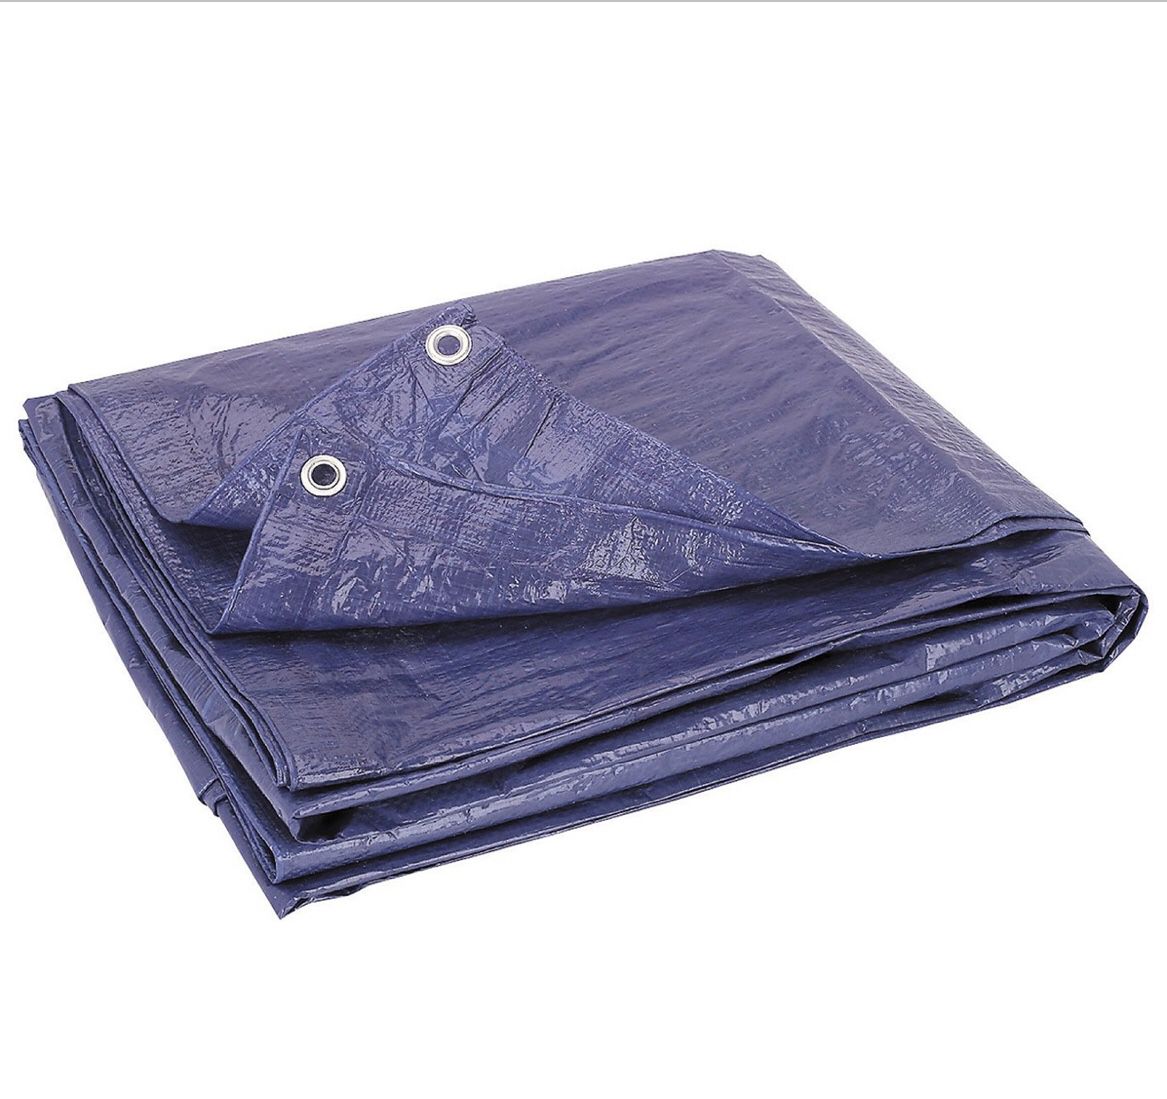 Blue and gray All Purpose/Weather Resistant Tarp